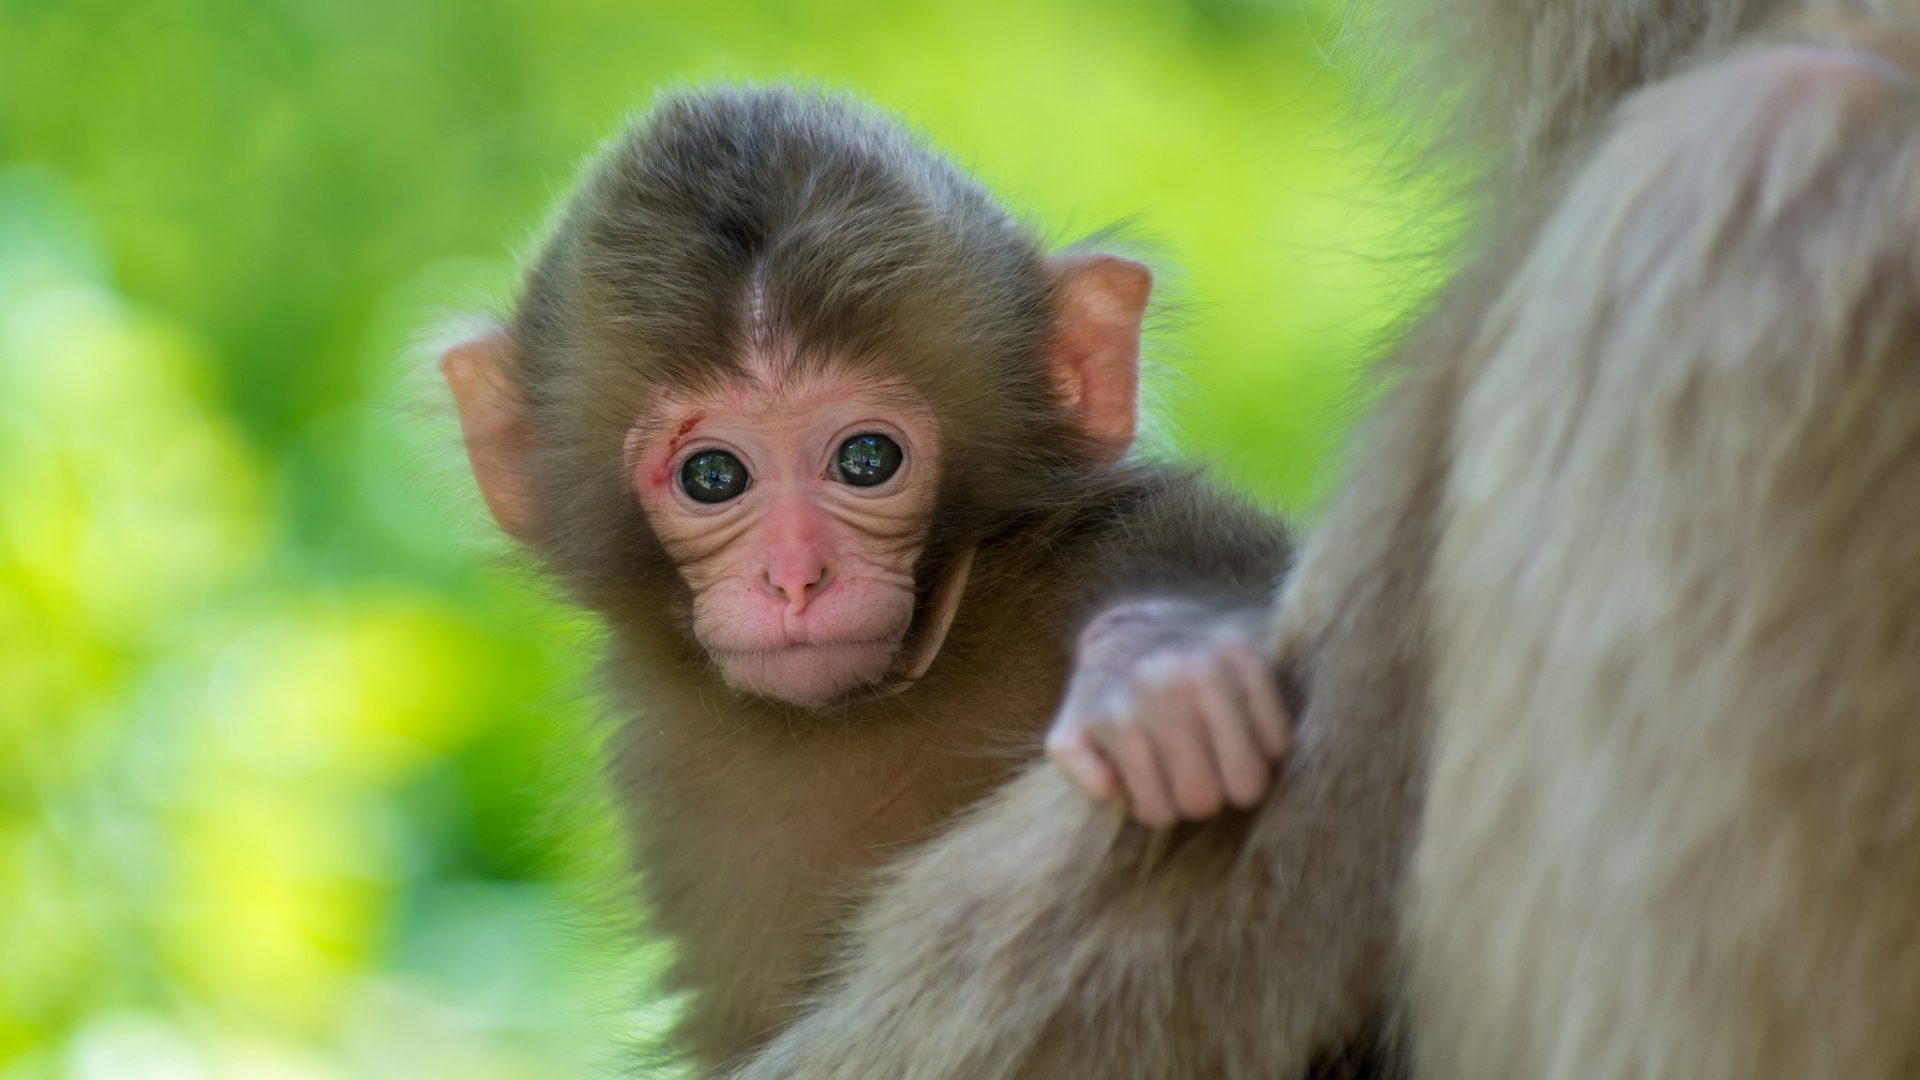 Monkey Tag Wallpaper Mother And Baby Animal Image